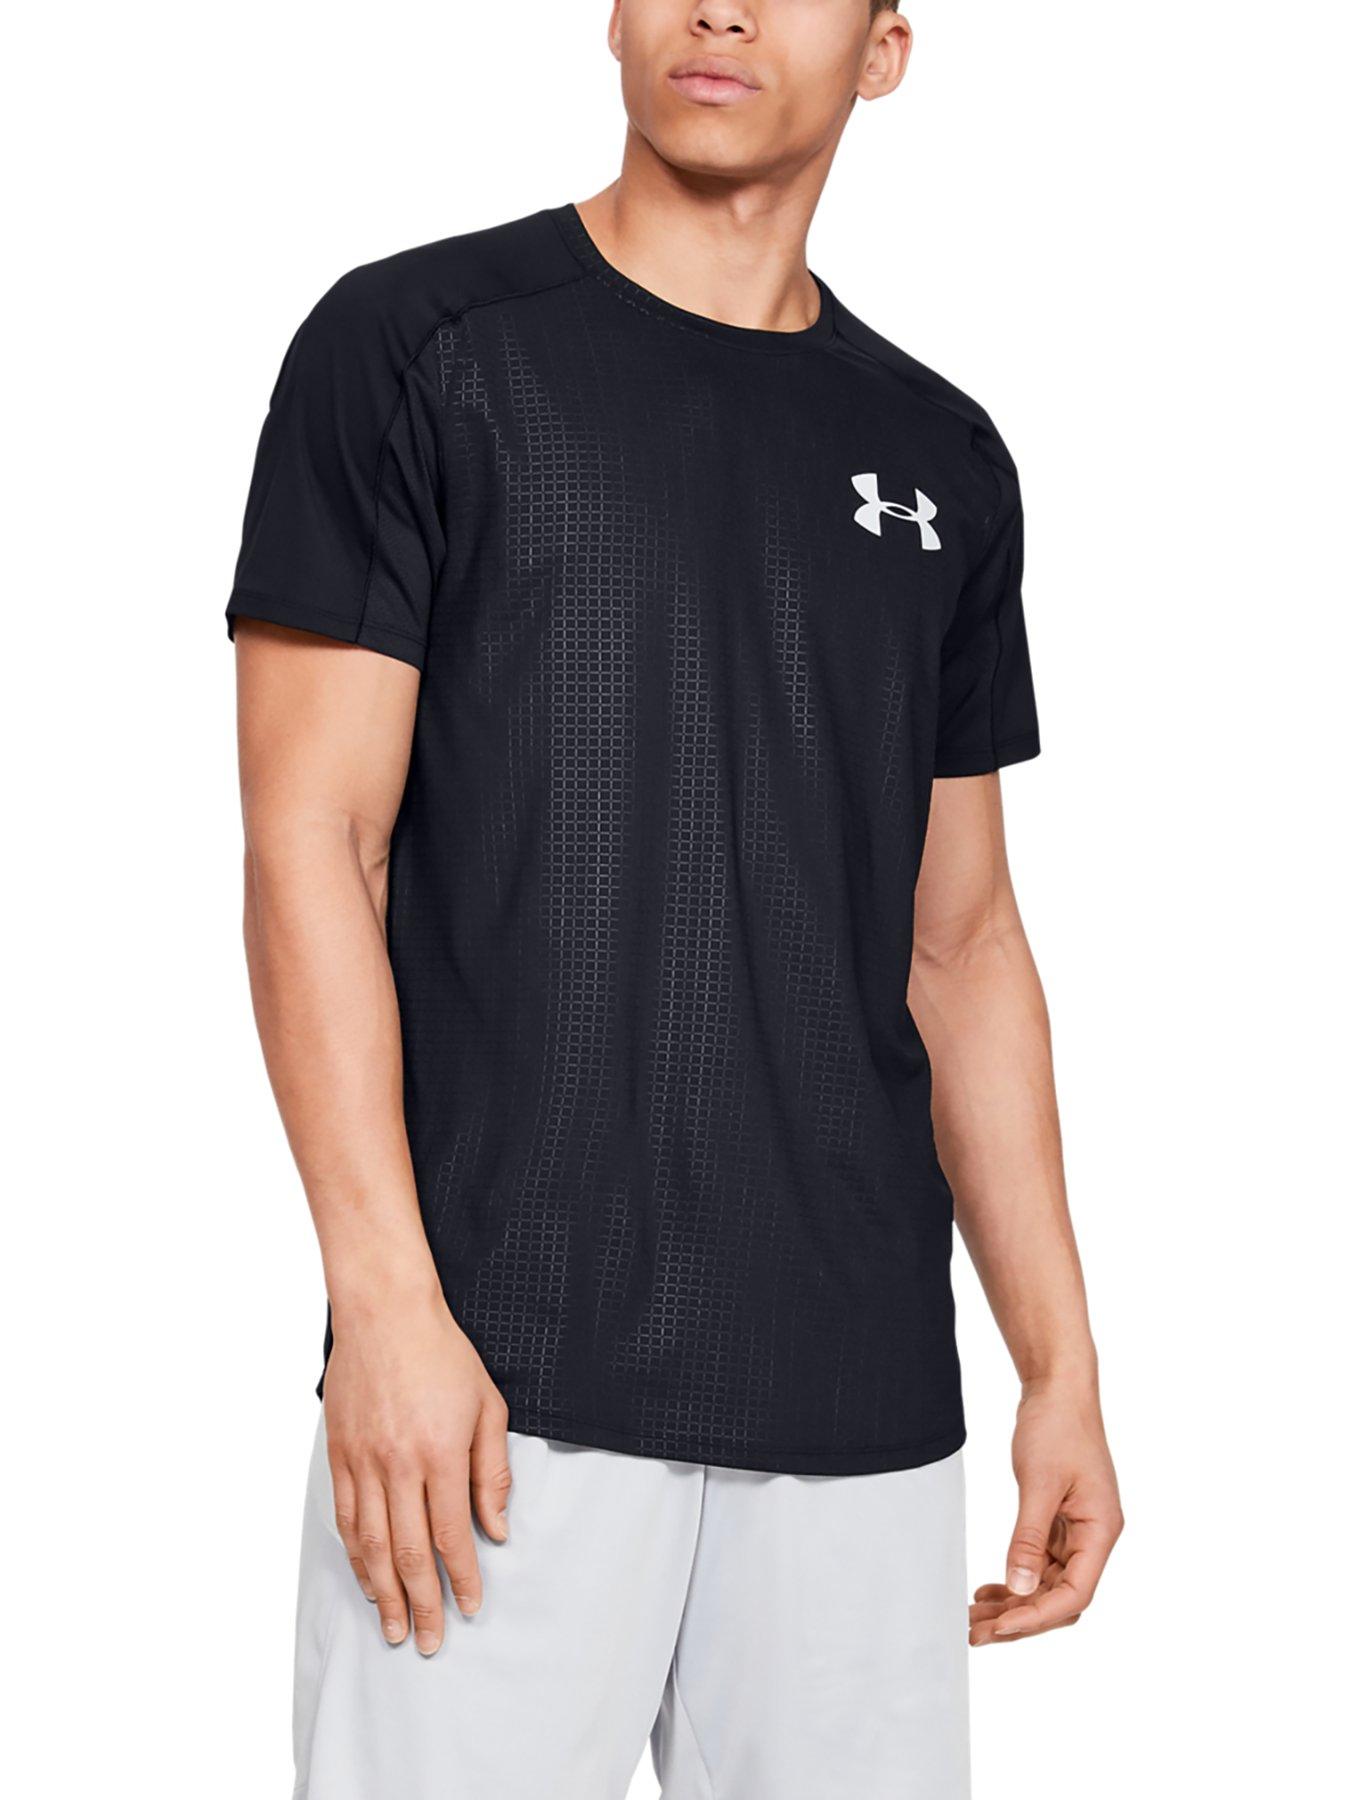 UNDER ARMOUR MK1 SS - Black | very.co.uk